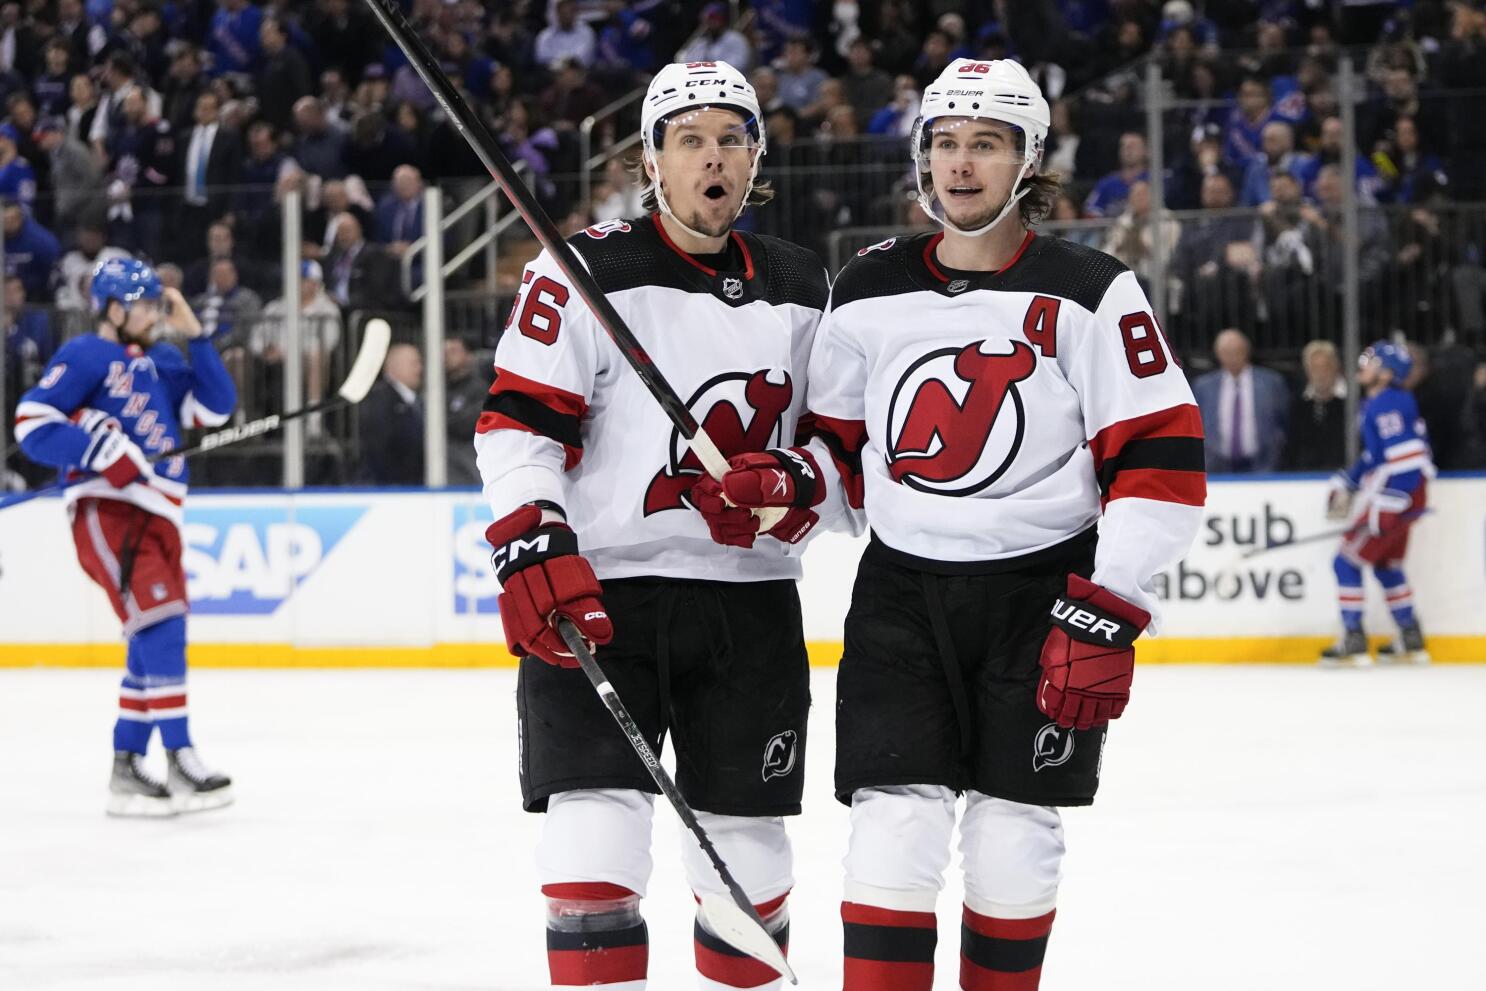 Hamilton scores winner, Jack Hughes adds two as Devils down Red Wings 4-3, Hockey